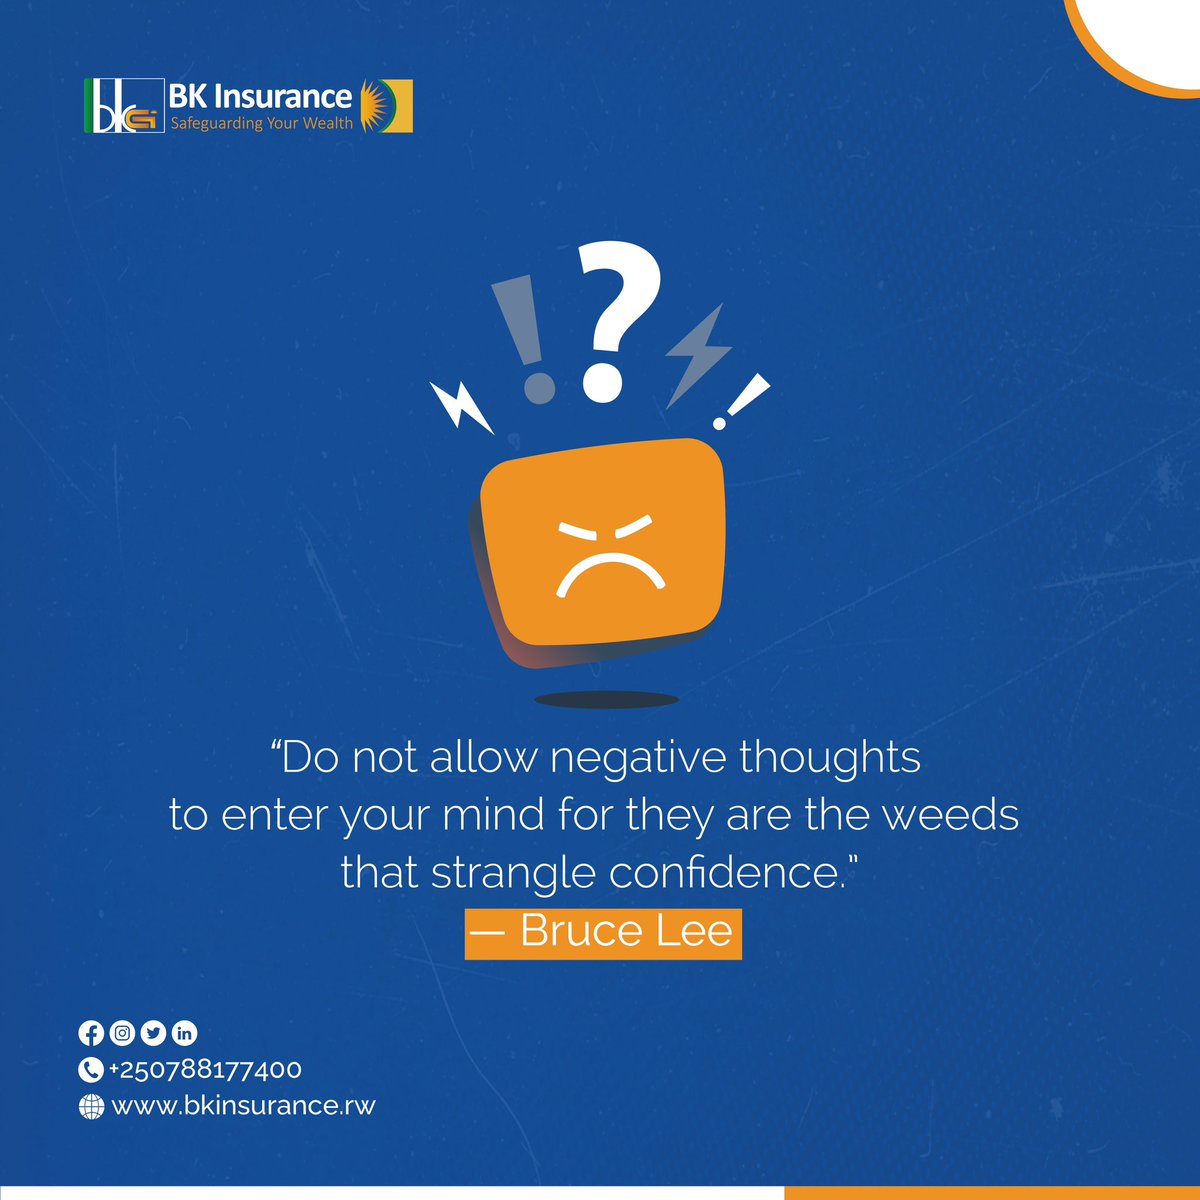 Happy Monday, let this one start on a good note for an even more positive week!

#BKInsurance #RwoX #Rwot